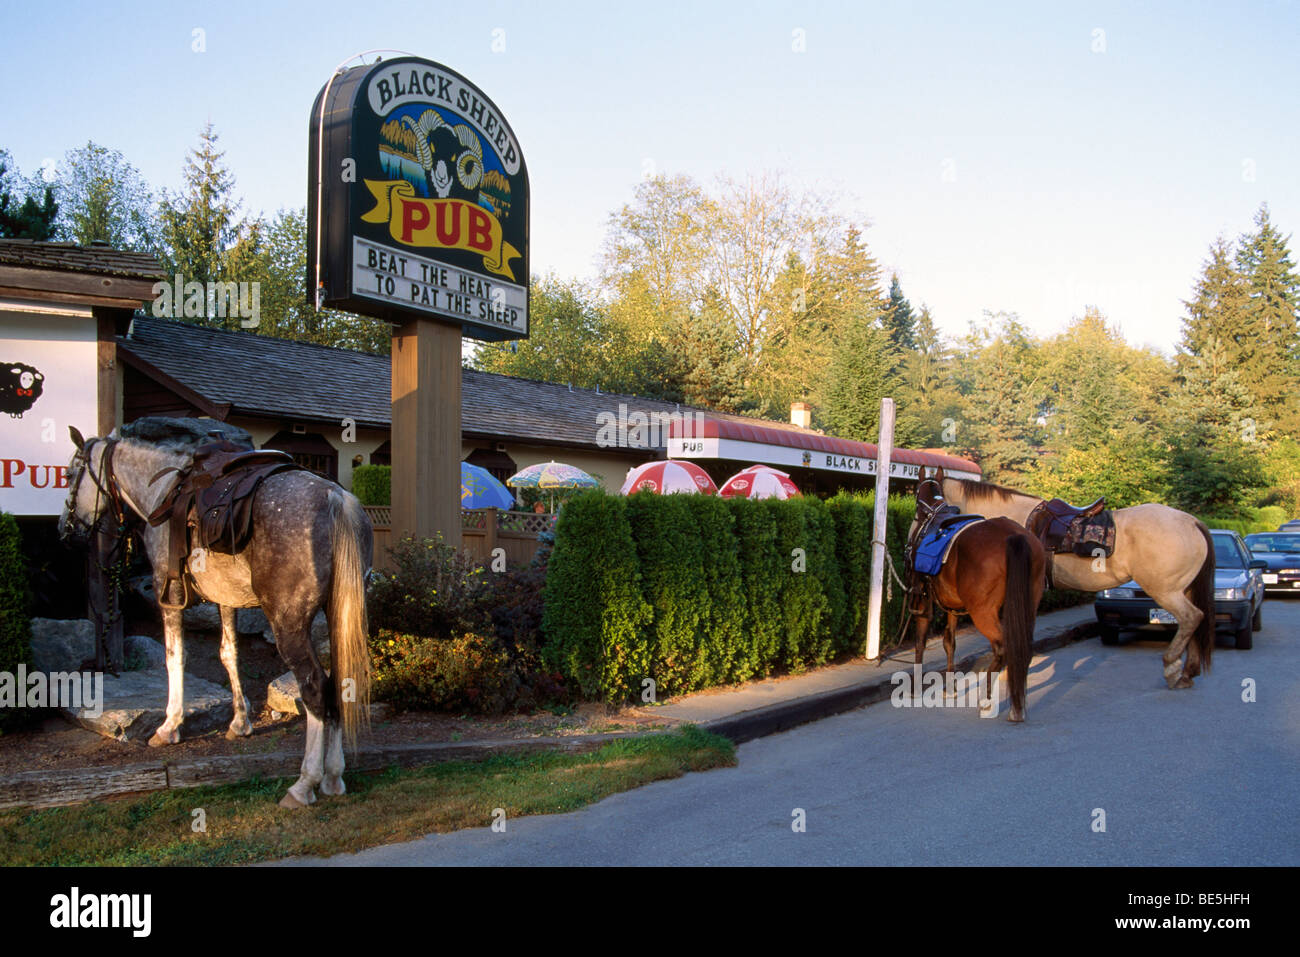 Maple Ridge, BC, Fraser Valley, British Columbia, Canada - Saddled Horses tied up and waiting at Pub to carry Owners Home Stock Photo